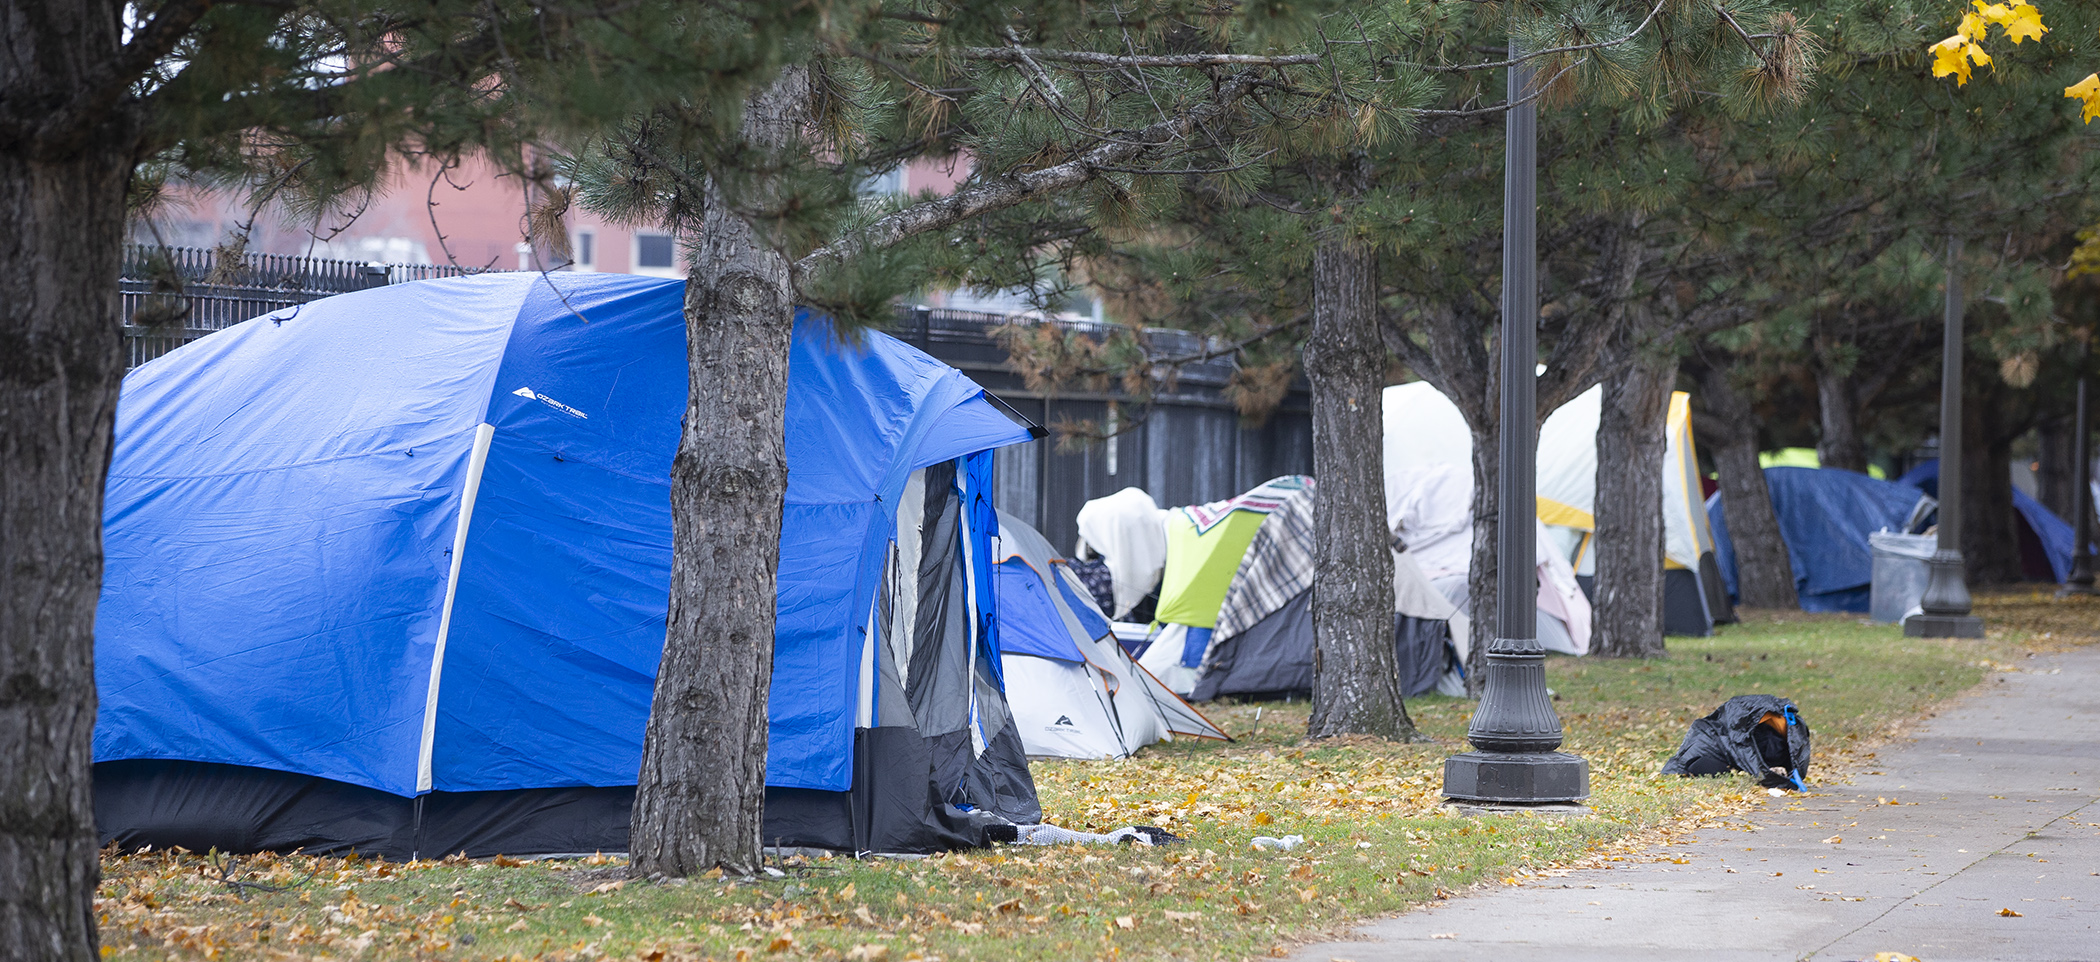 A homeless encampment in St. Paul pictured in 2018. (House Photography file photo)